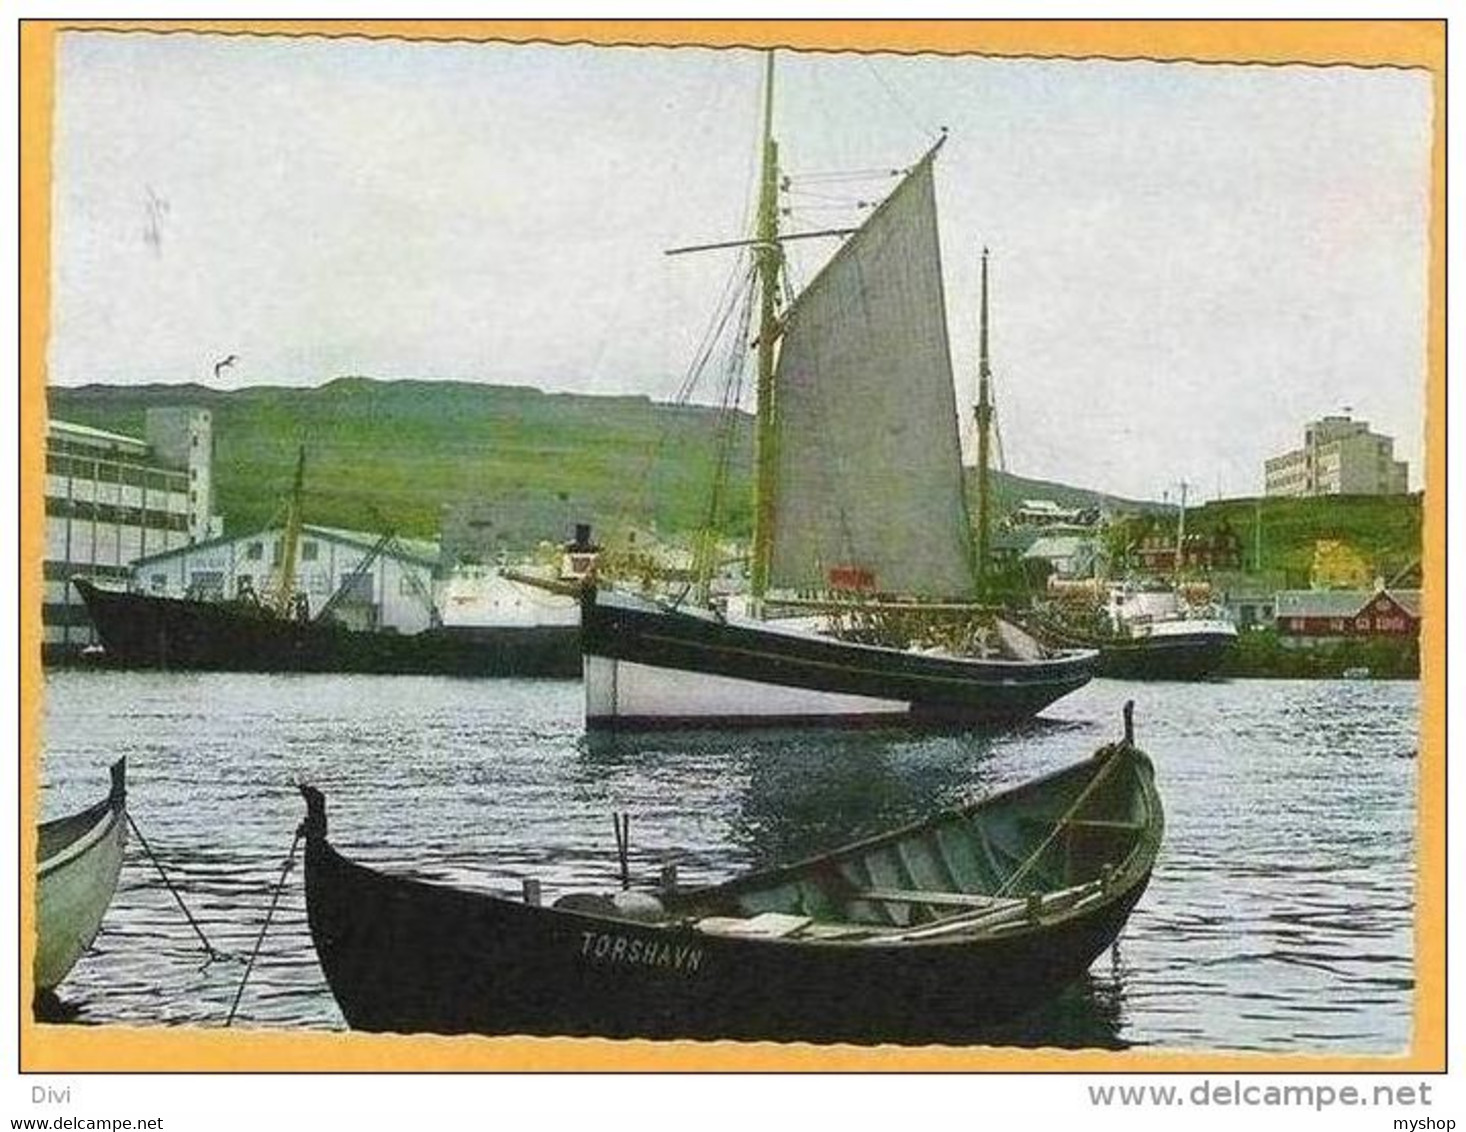 FAROE ISLANDS 002, * OLD And NEW IN THE HARBOUR OF TORSHAVN * SENT With STAMP * SEE SCANS - Faroe Islands